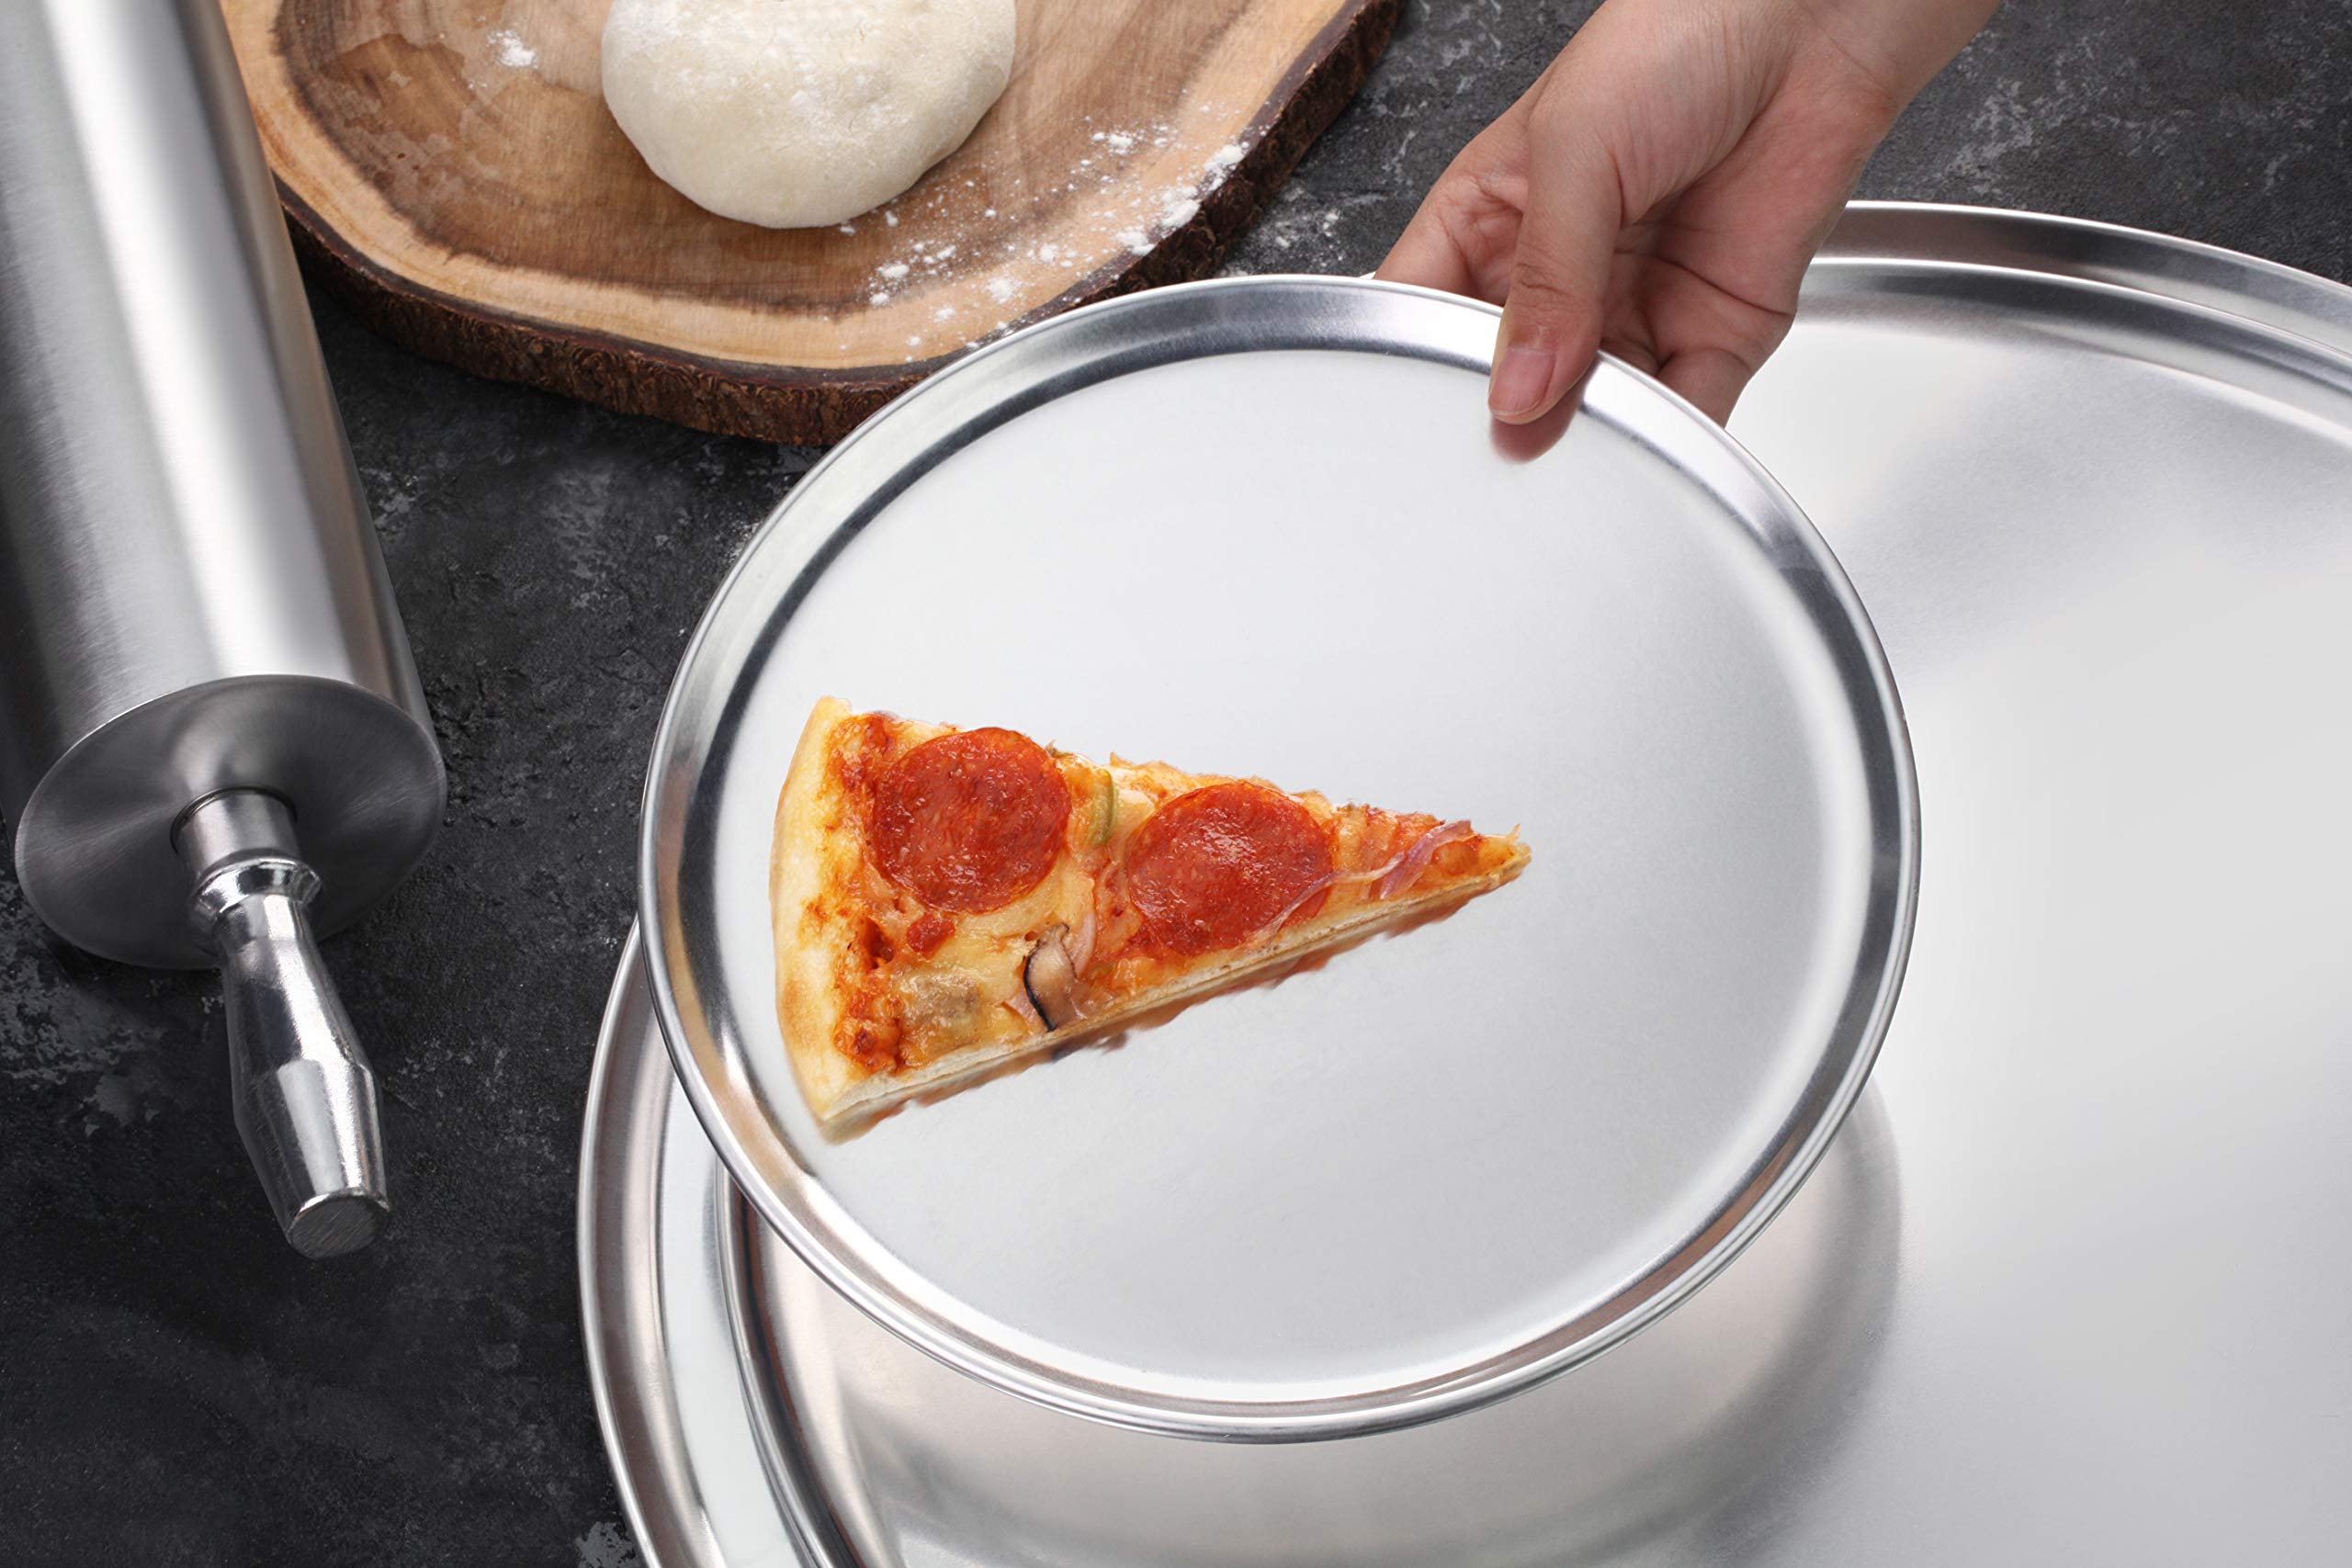 New Star Foodservice 51032 Restaurant-Grade Aluminum Pizza Pan, Baking Tray, Coupe Style, 14-Inch, Pack of 6